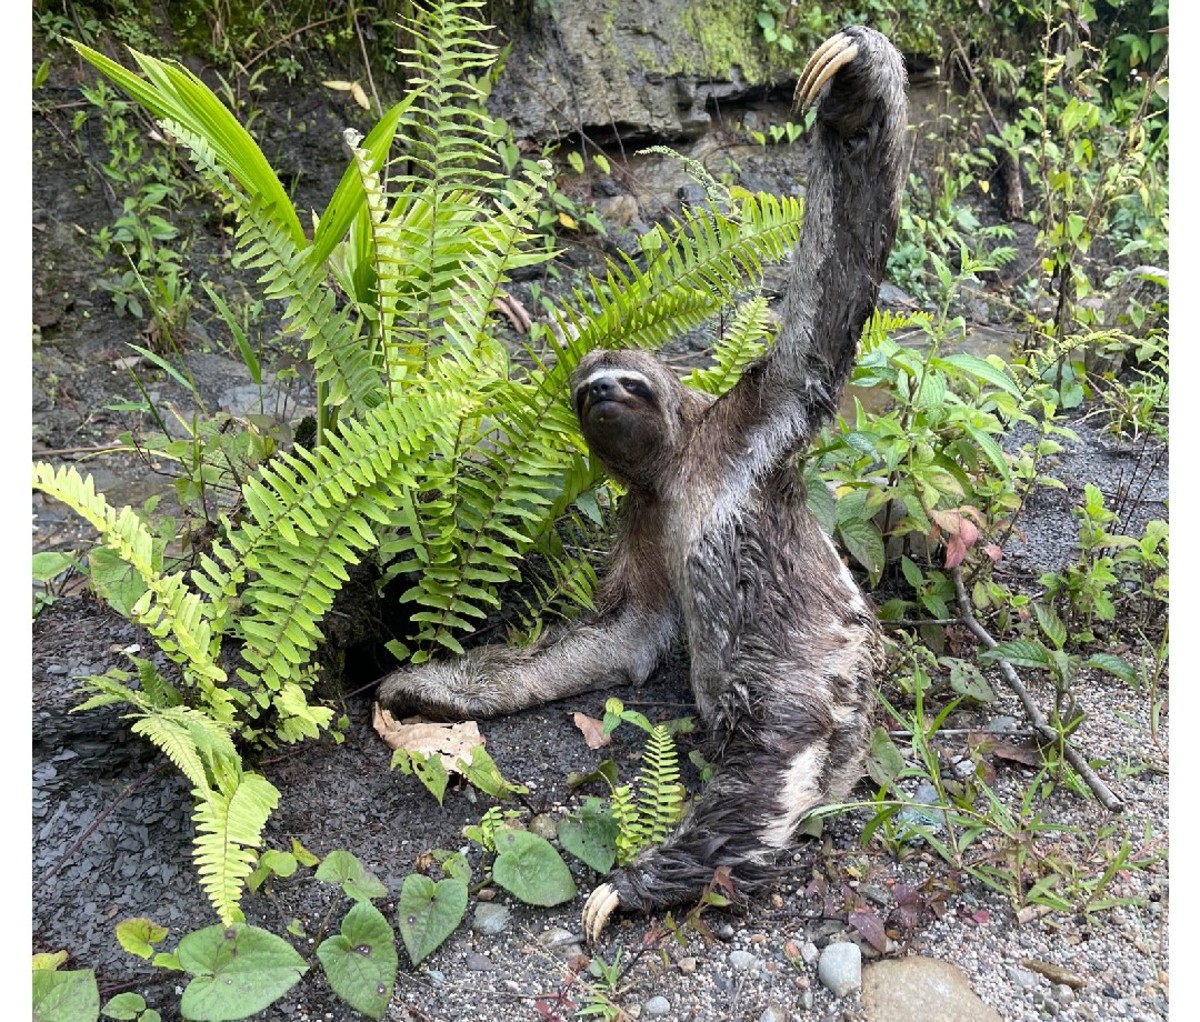 Three-toed sloth "waves" with one arm from the side of the river in Ecuador